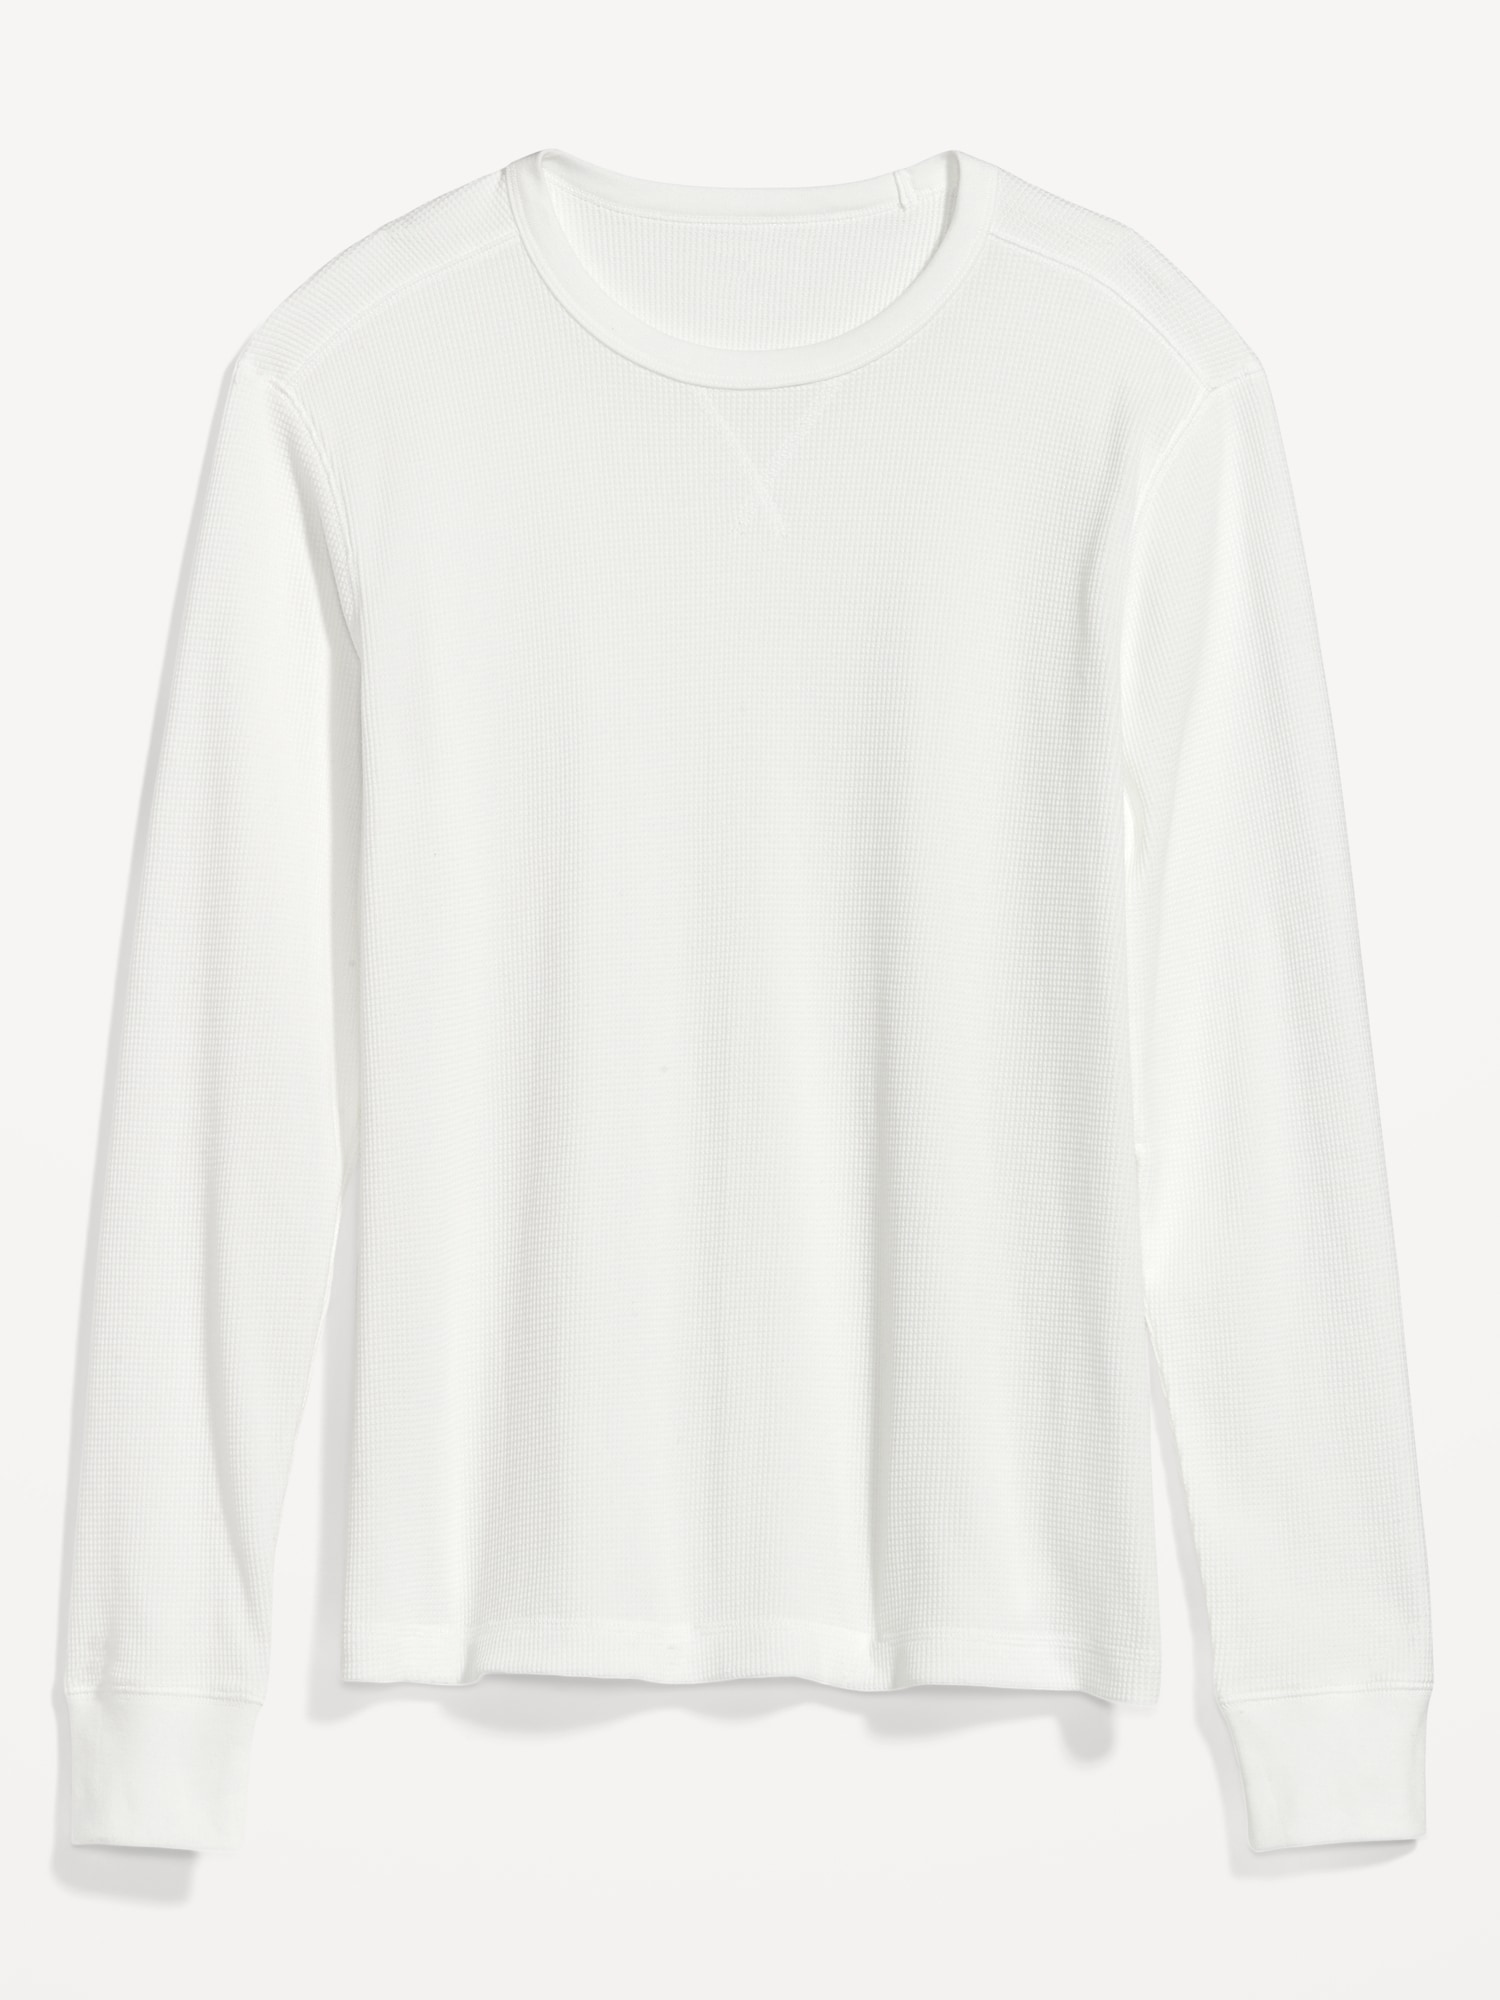 Old Navy Thermal-Knit Long-Sleeve T-Shirt for Men white. 1